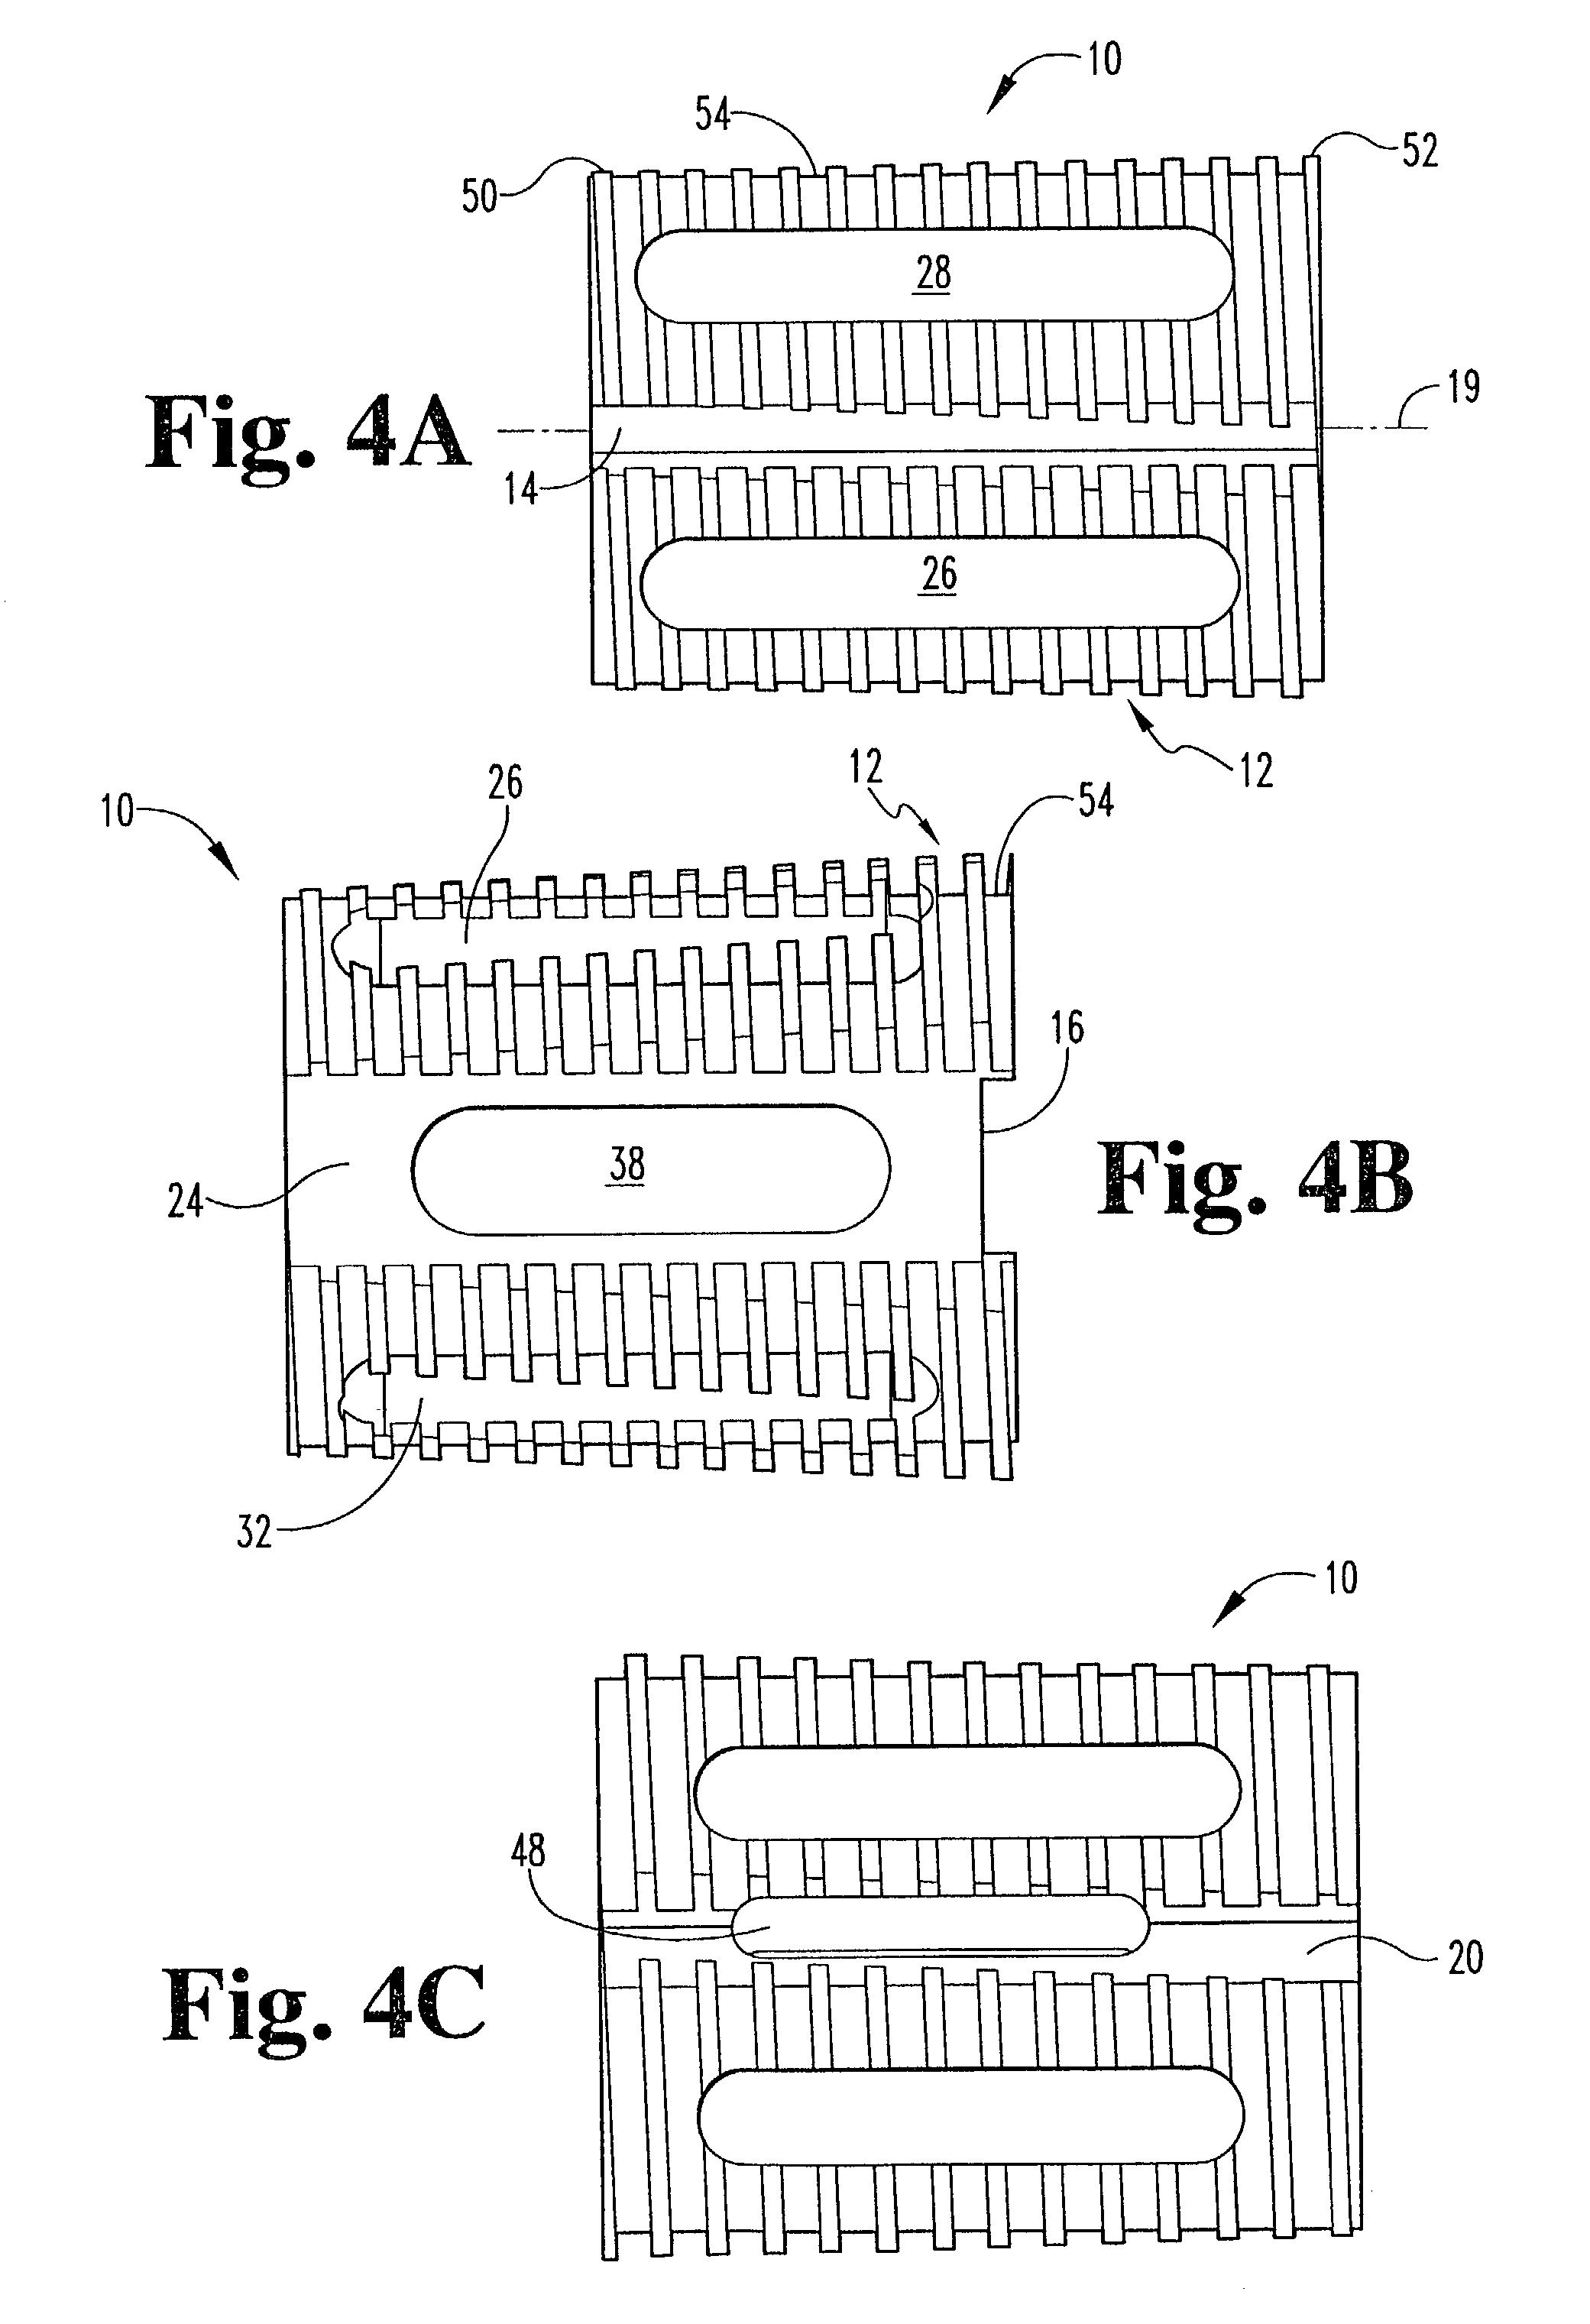 Interbody fusion device with anti-rotation features